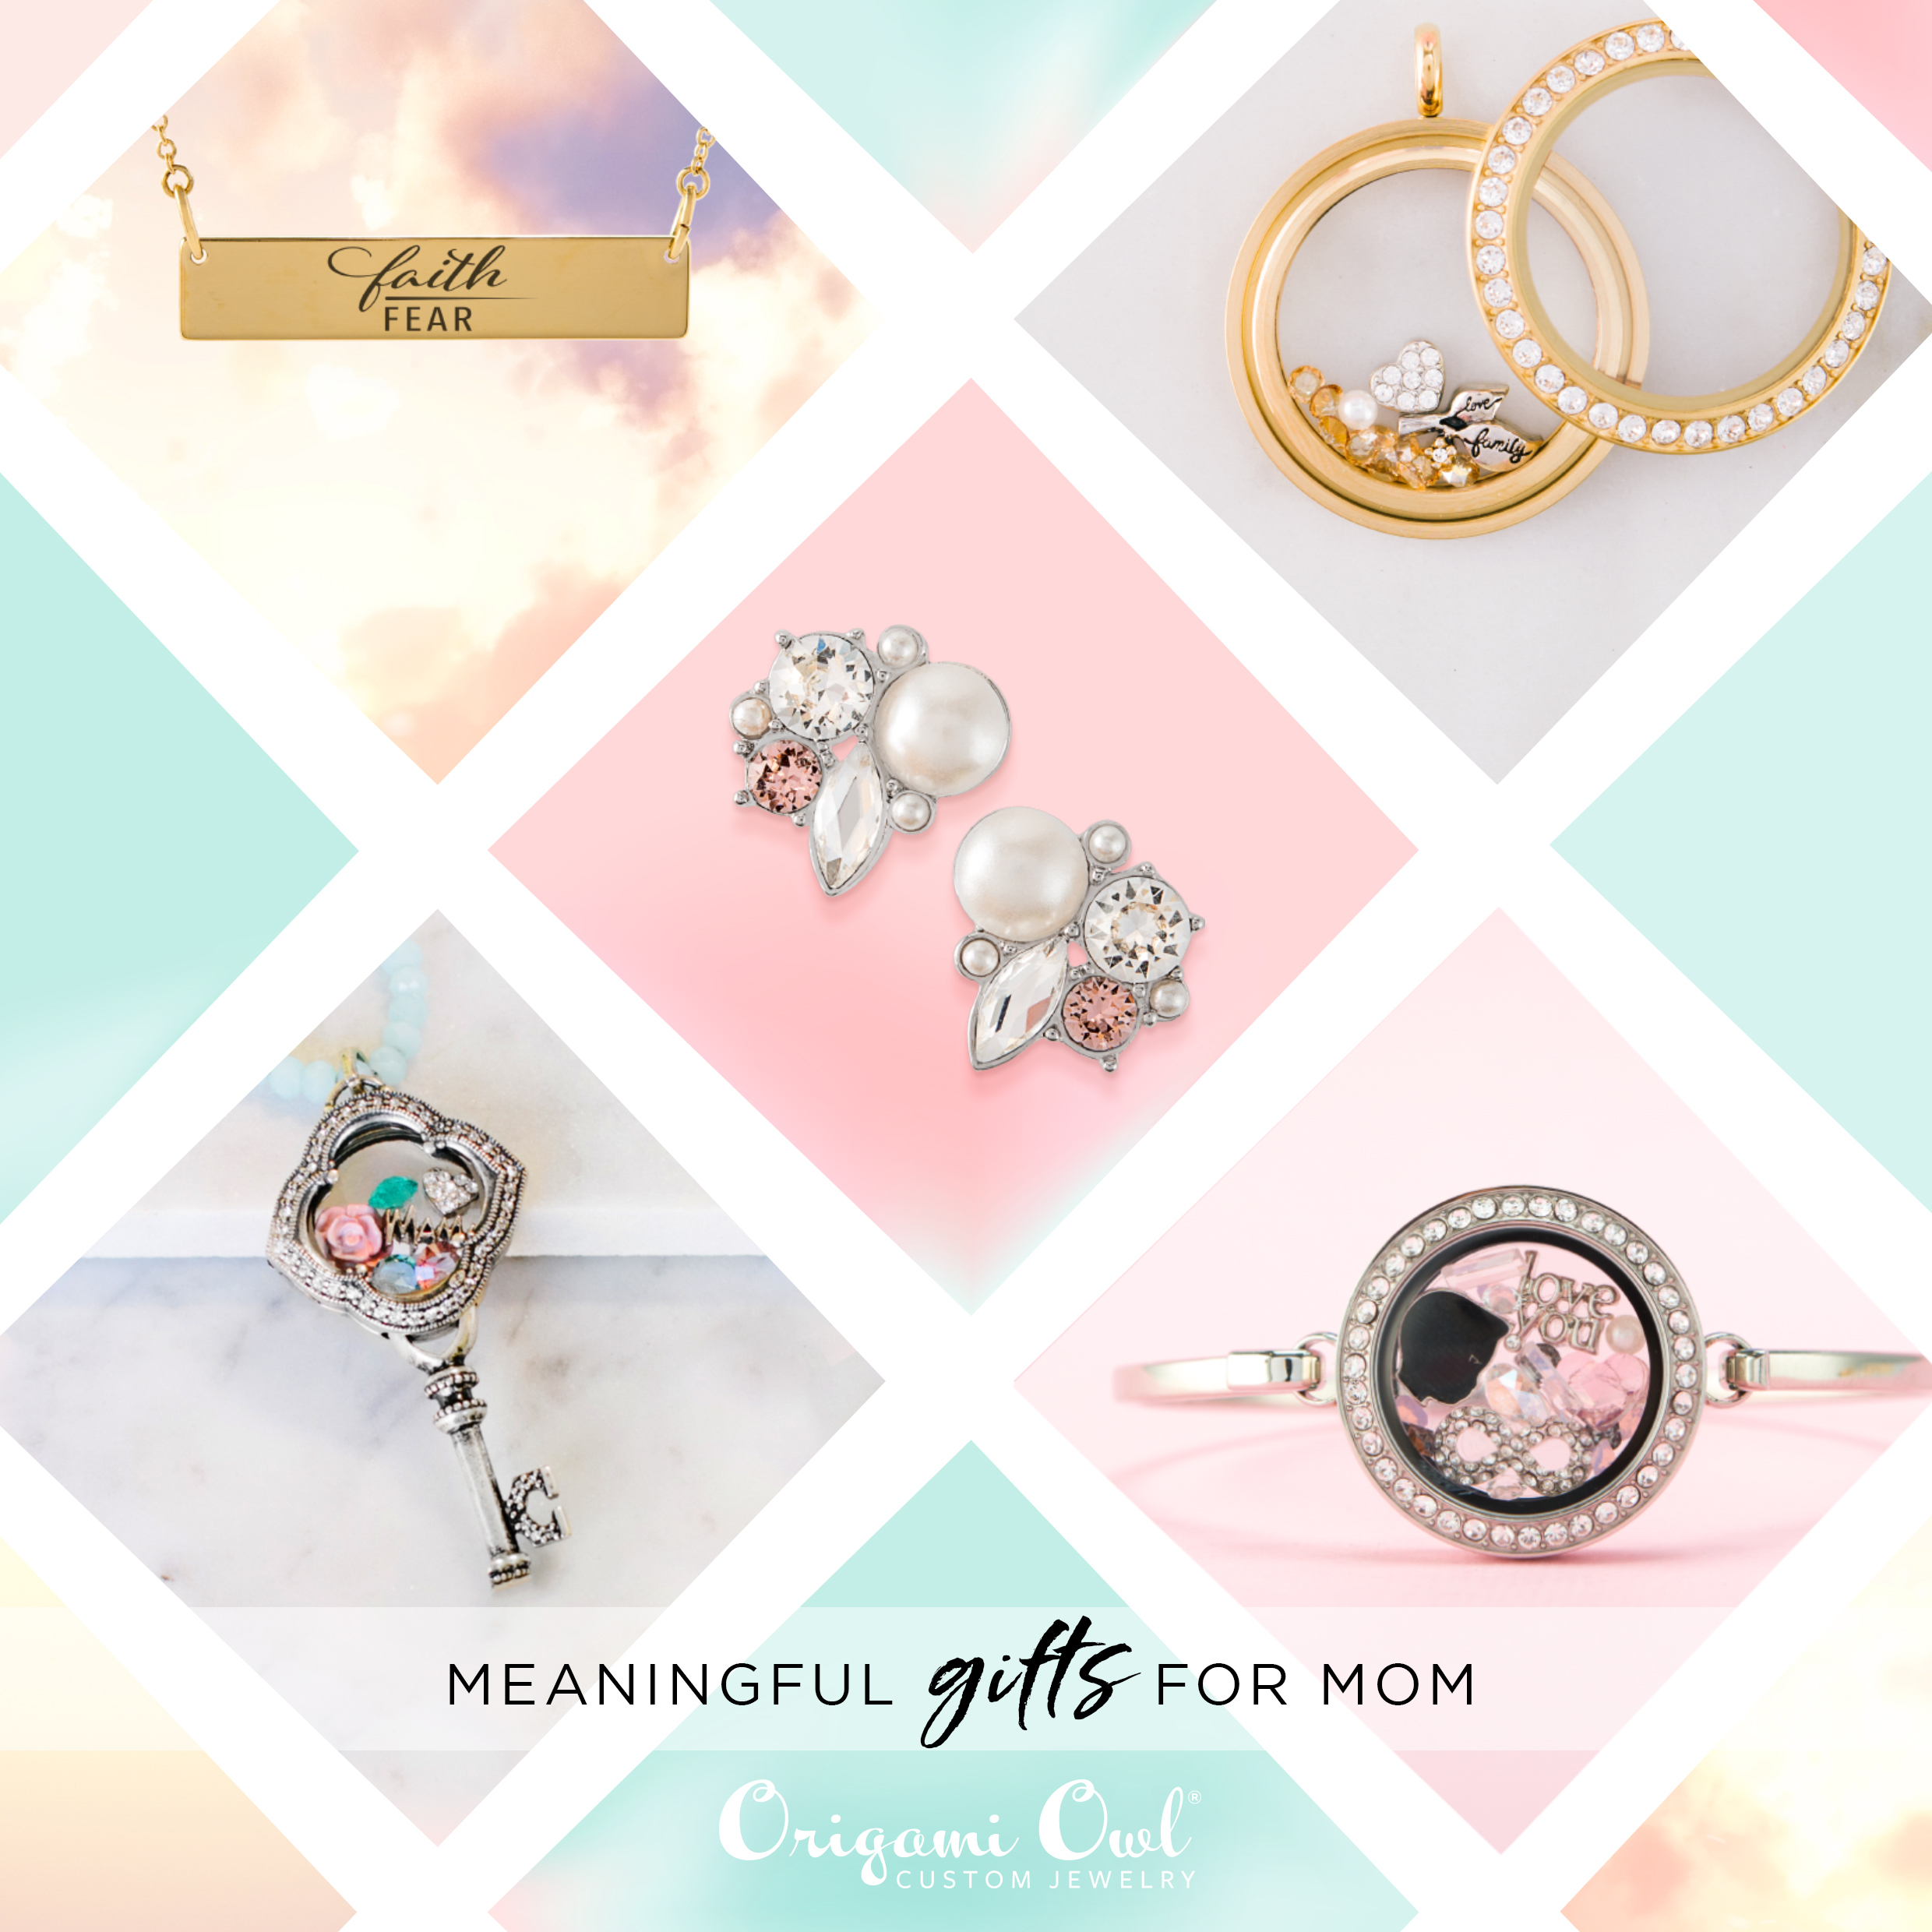 Where To Buy Origami Owl Origami Owl Mothers Day Collection 2018 Origami Owl Independent